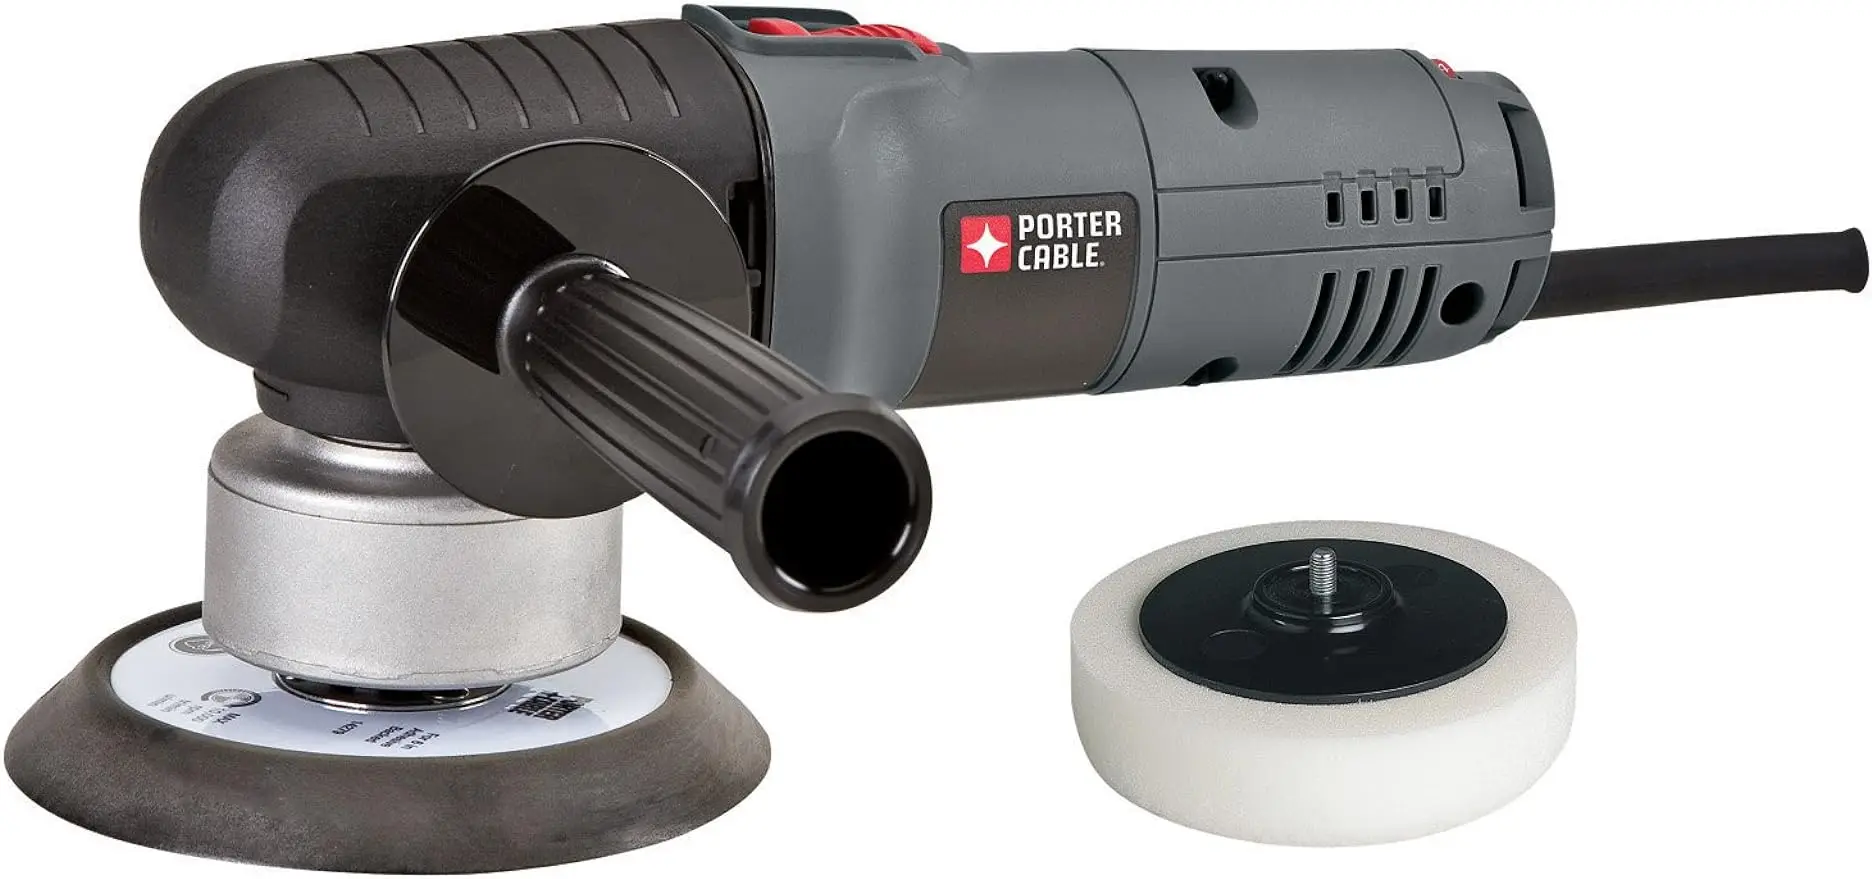 

PORTER-CABLE Sander with Polishing Pad, 4.5-Amp, 6-Inch Polisher, 2,500-6,800 OPM, Corded (7346SP)